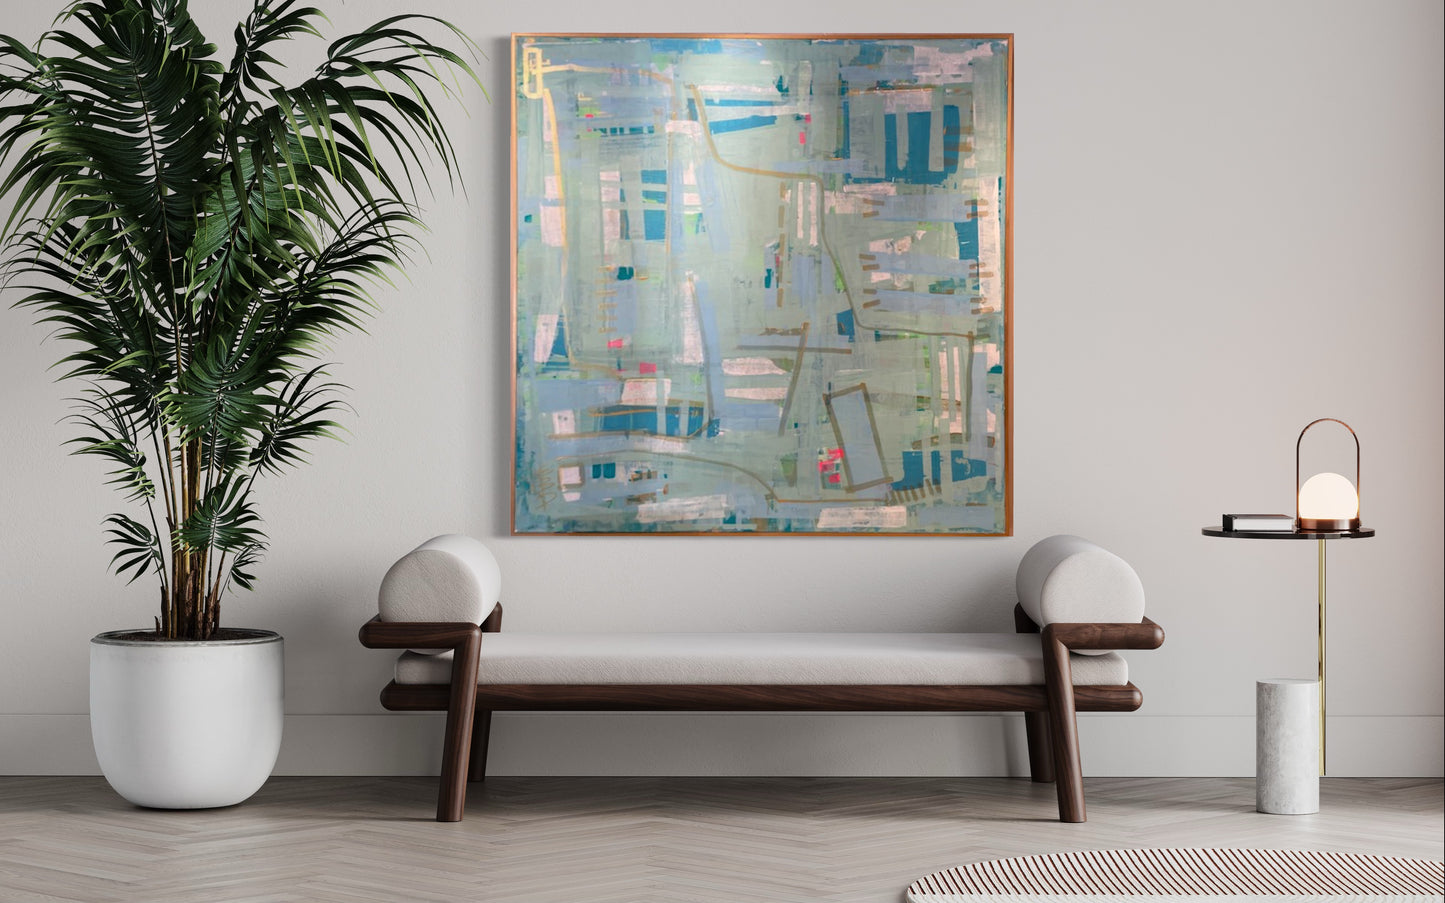 48x48 Intersections abstract, blues with gold/pink/green highlights